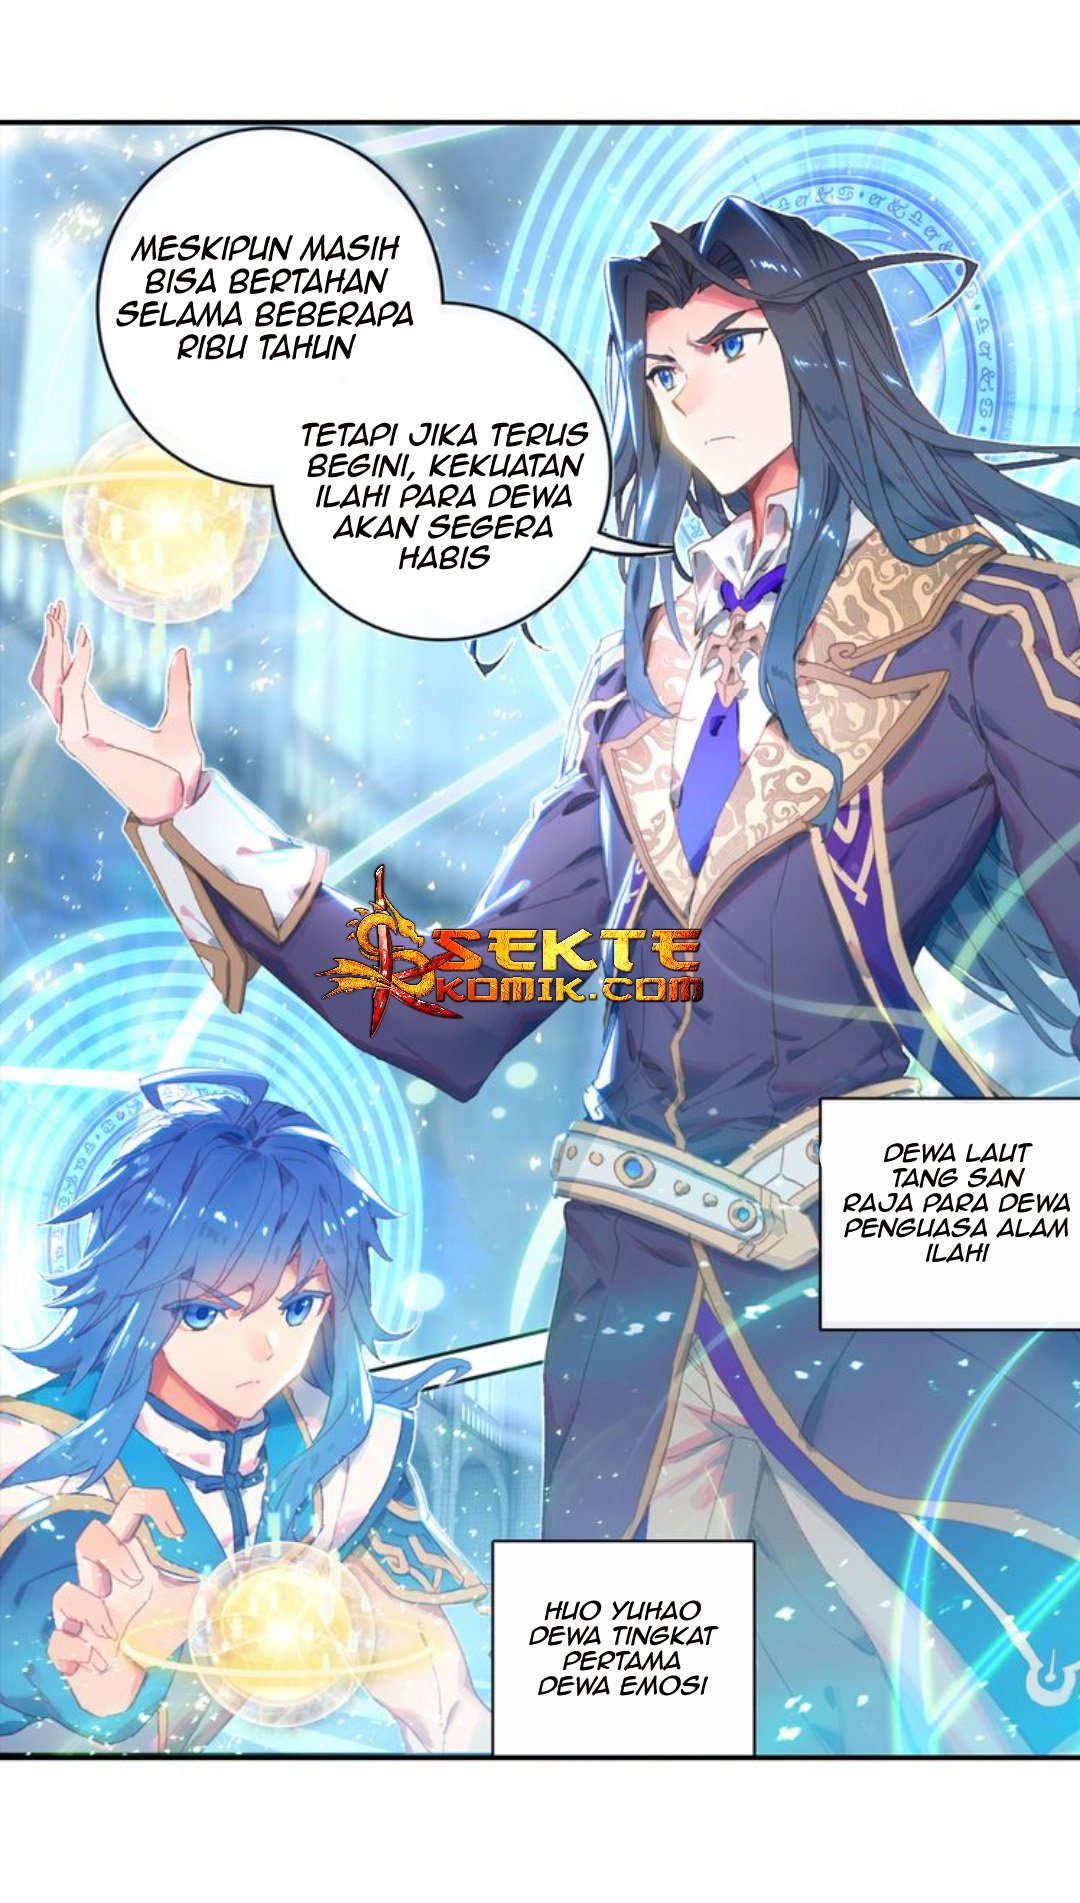 Soul Land Legend of the Tang’s Hero Chapter 01